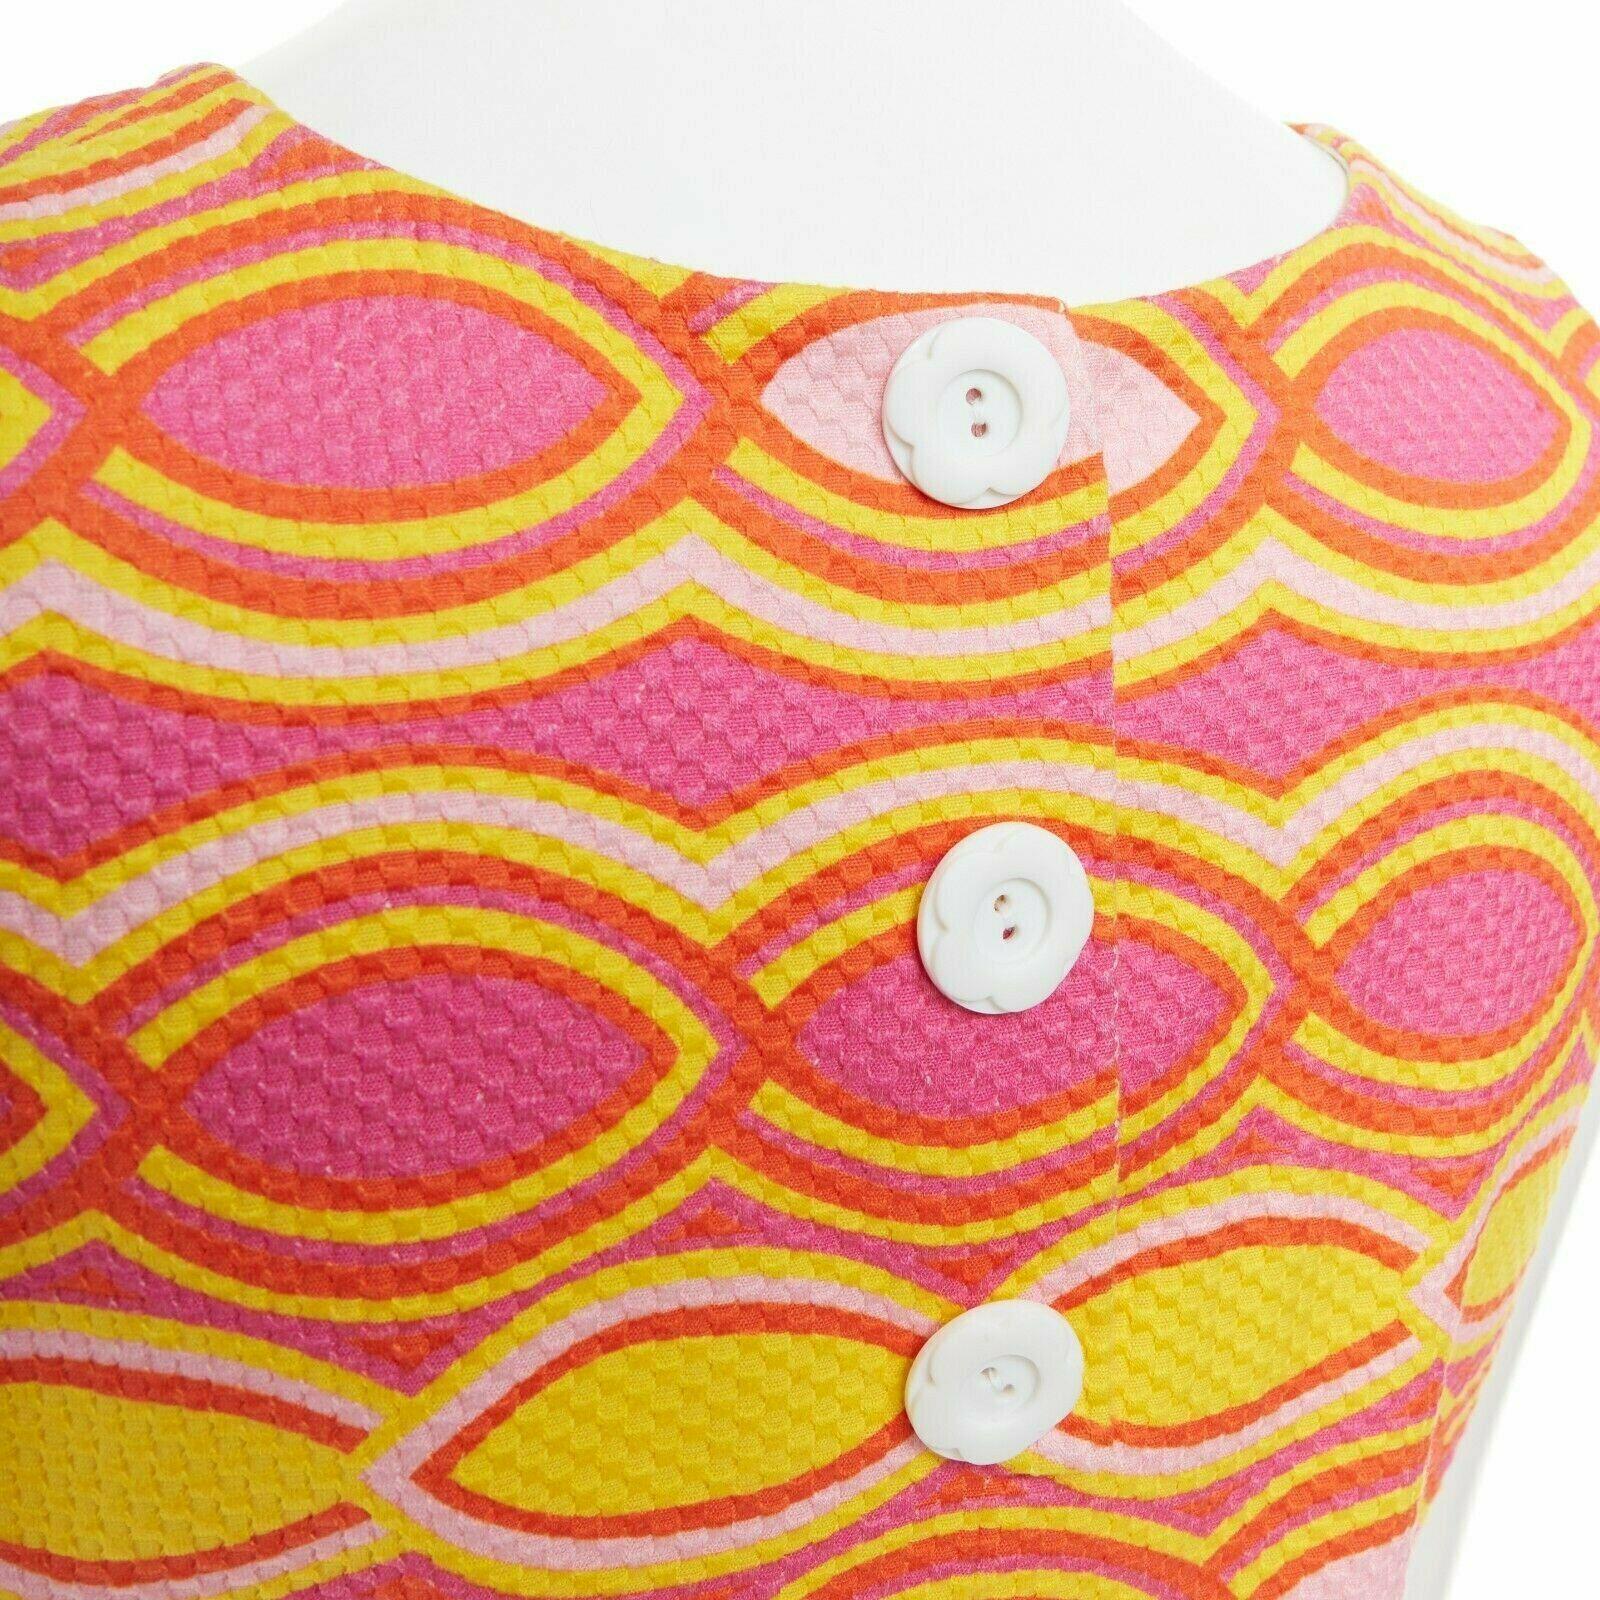 LISA PERRY 60s mod con pink yellow geometric print textured cotton top US2 UK6 S 1